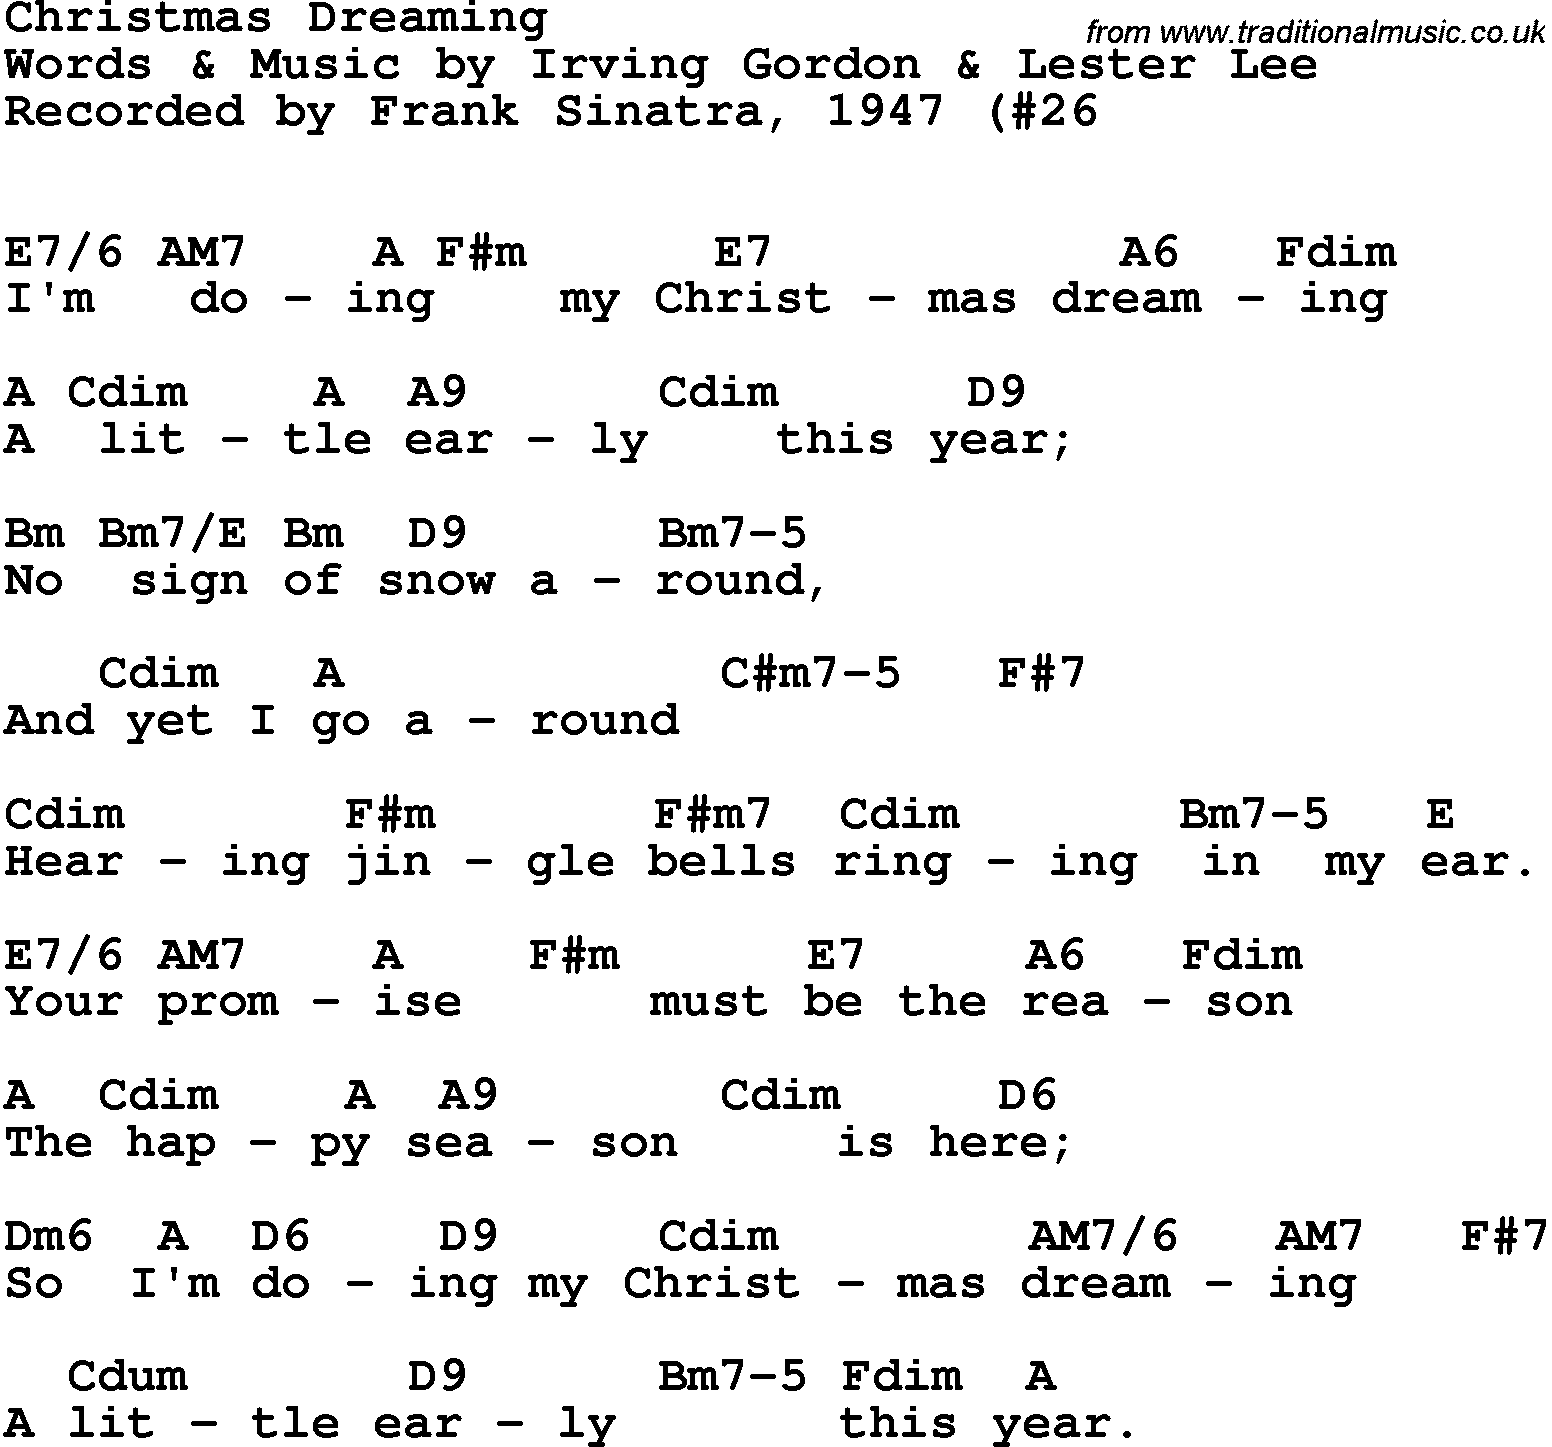 Song Lyrics with guitar chords for Christmas Dreaming - Frank Sinatra, 1947